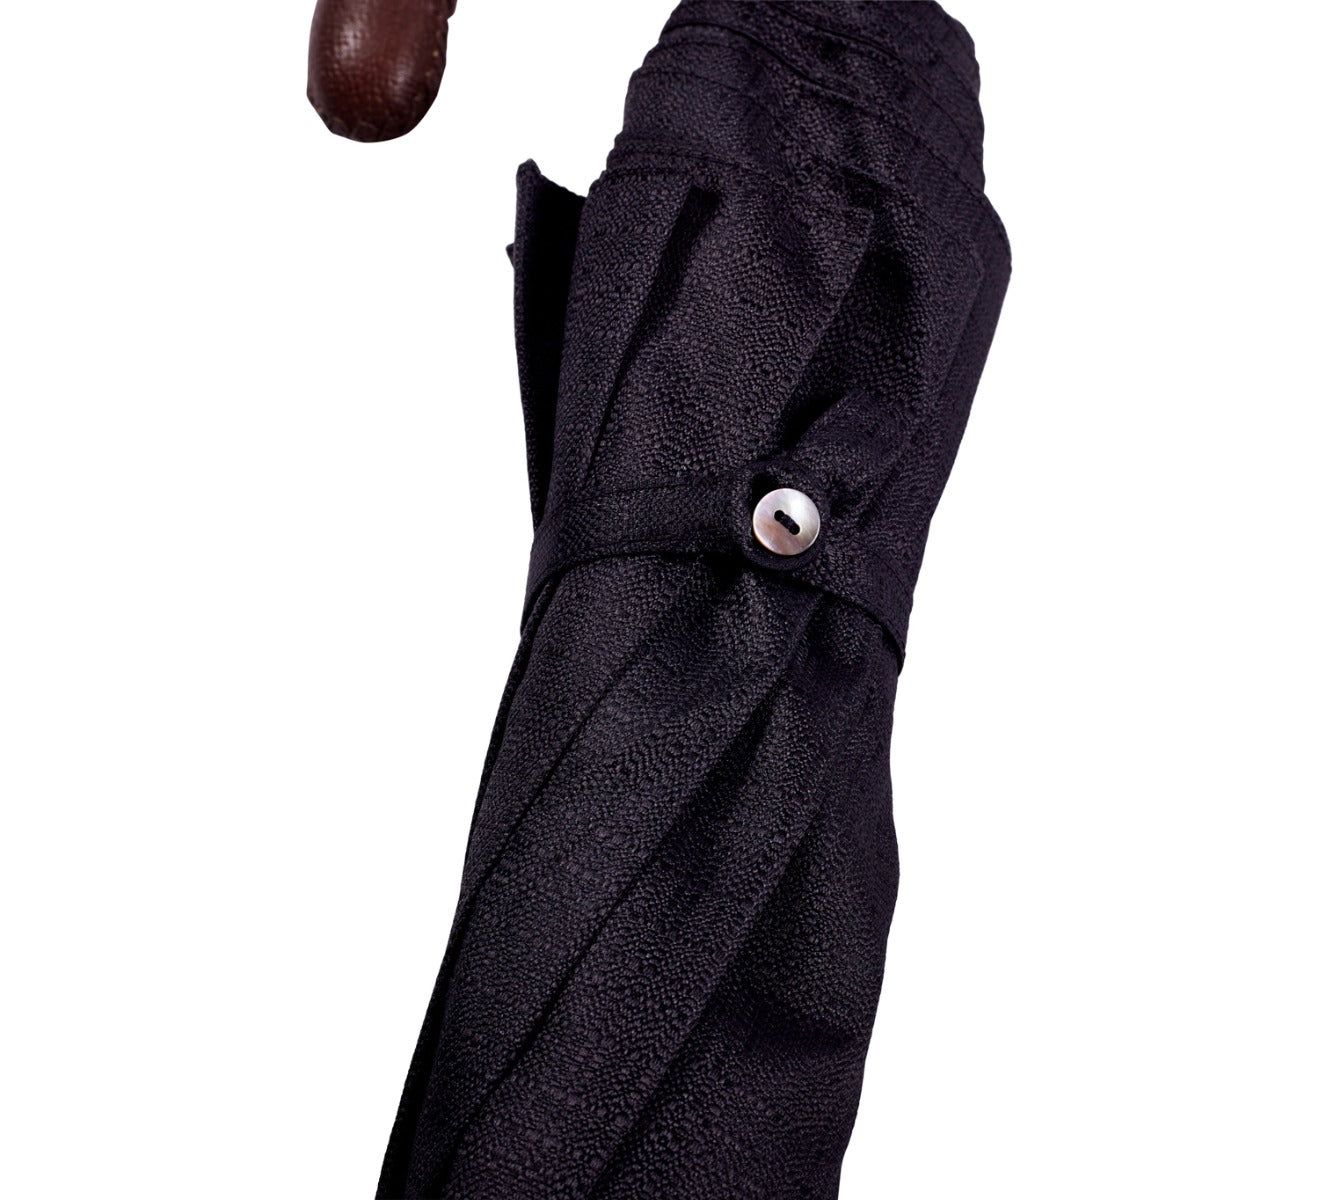 A KirbyAllison.com Brown Pigskin Travel Umbrella with Black Canopy and a black handle.